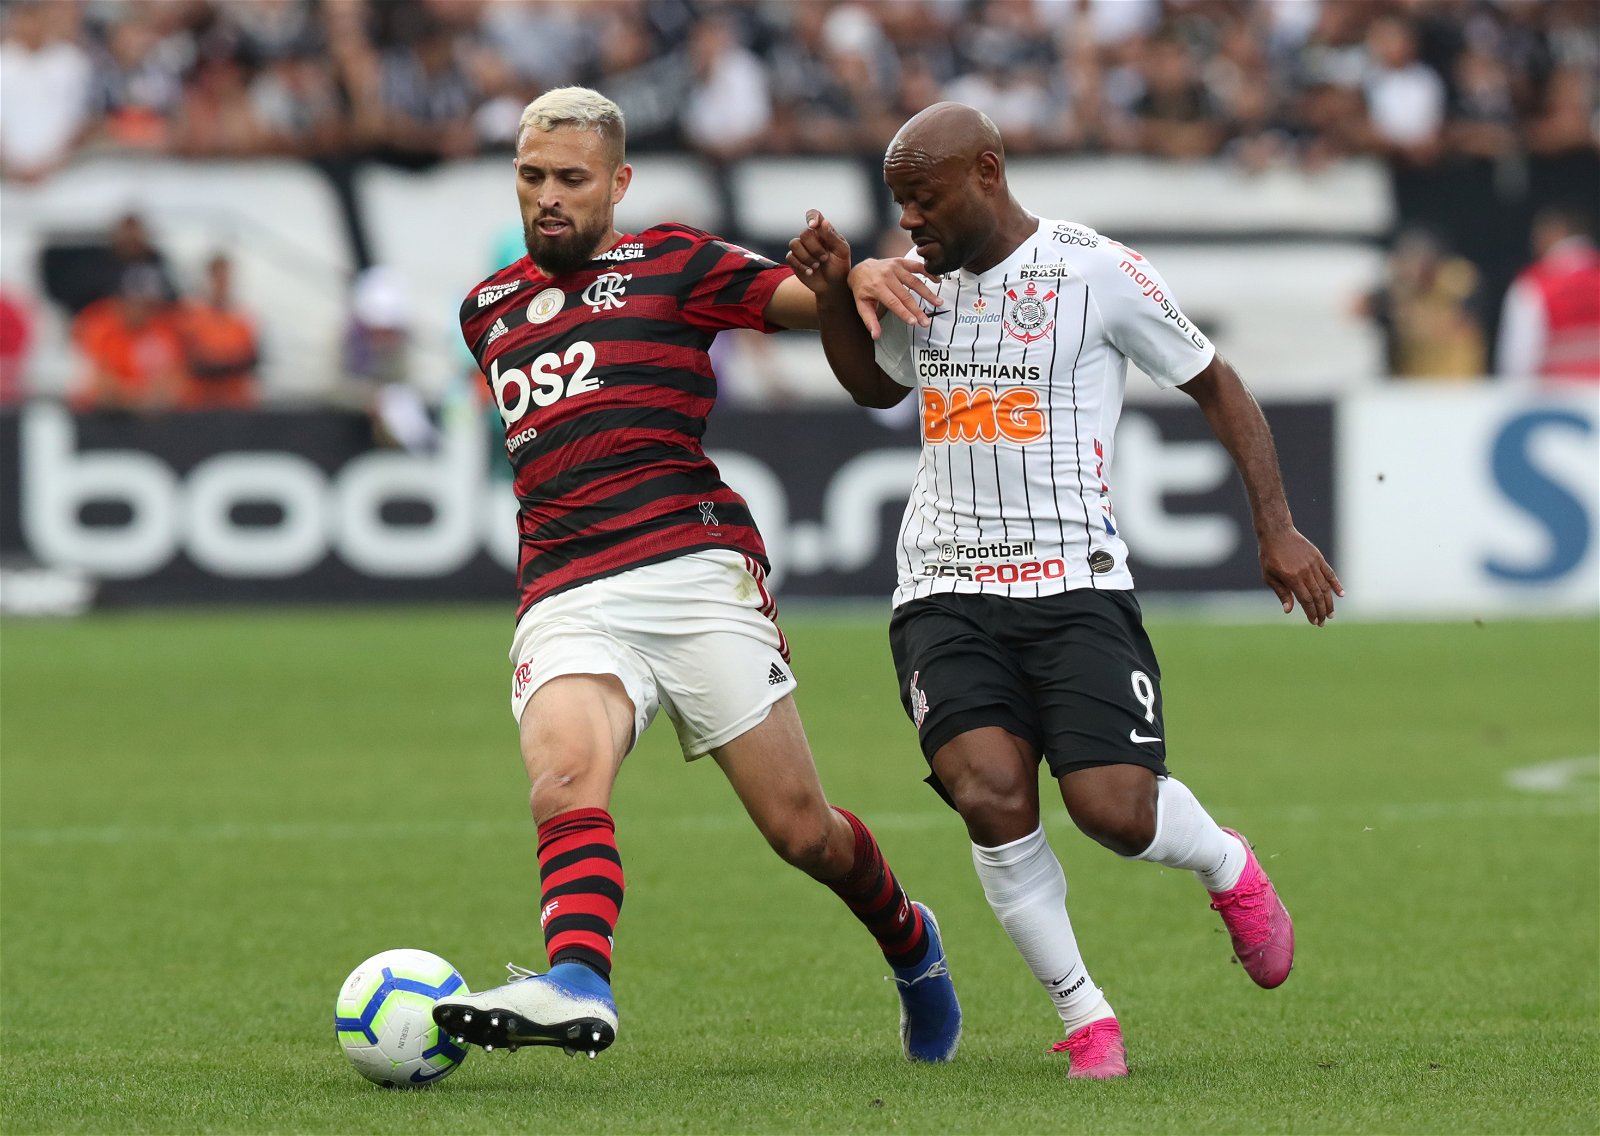 OFFICIAL: Leo Duarte moves from Flamengo to AC Milan 1